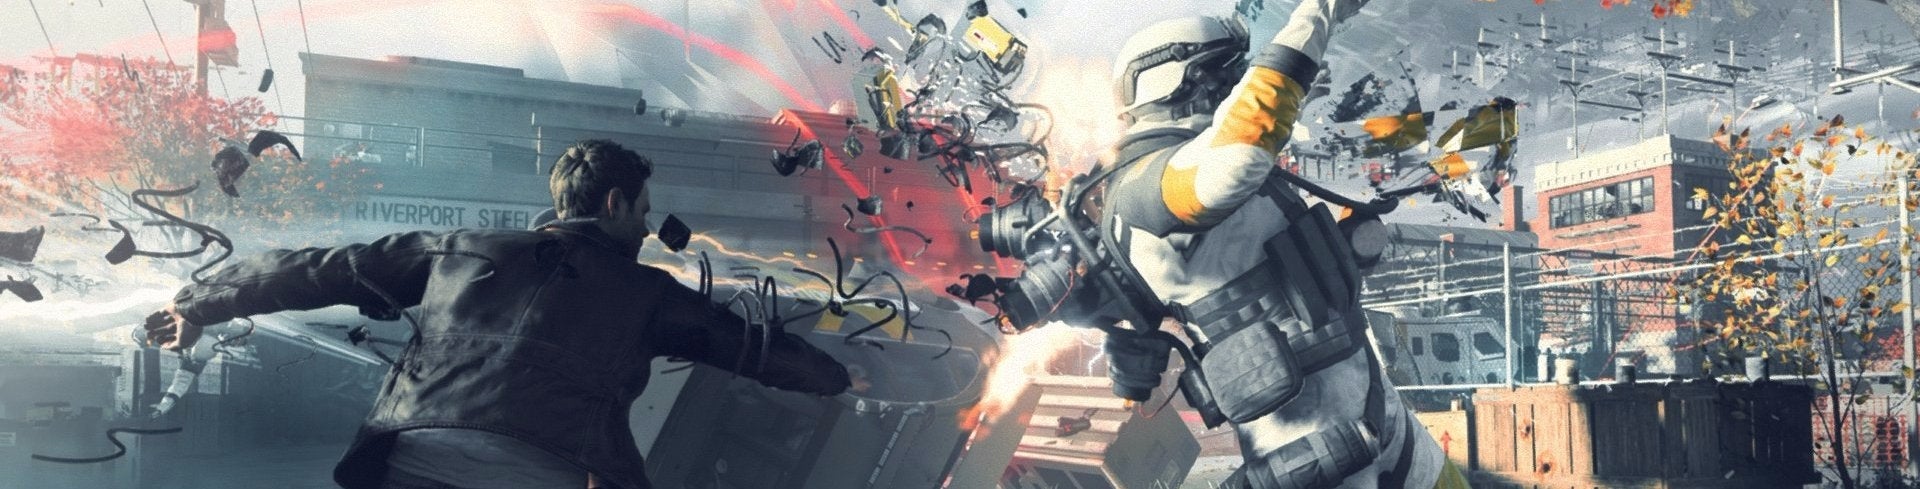 Image for Watch: Ian plays 90 minutes of Quantum Break on Xbox One